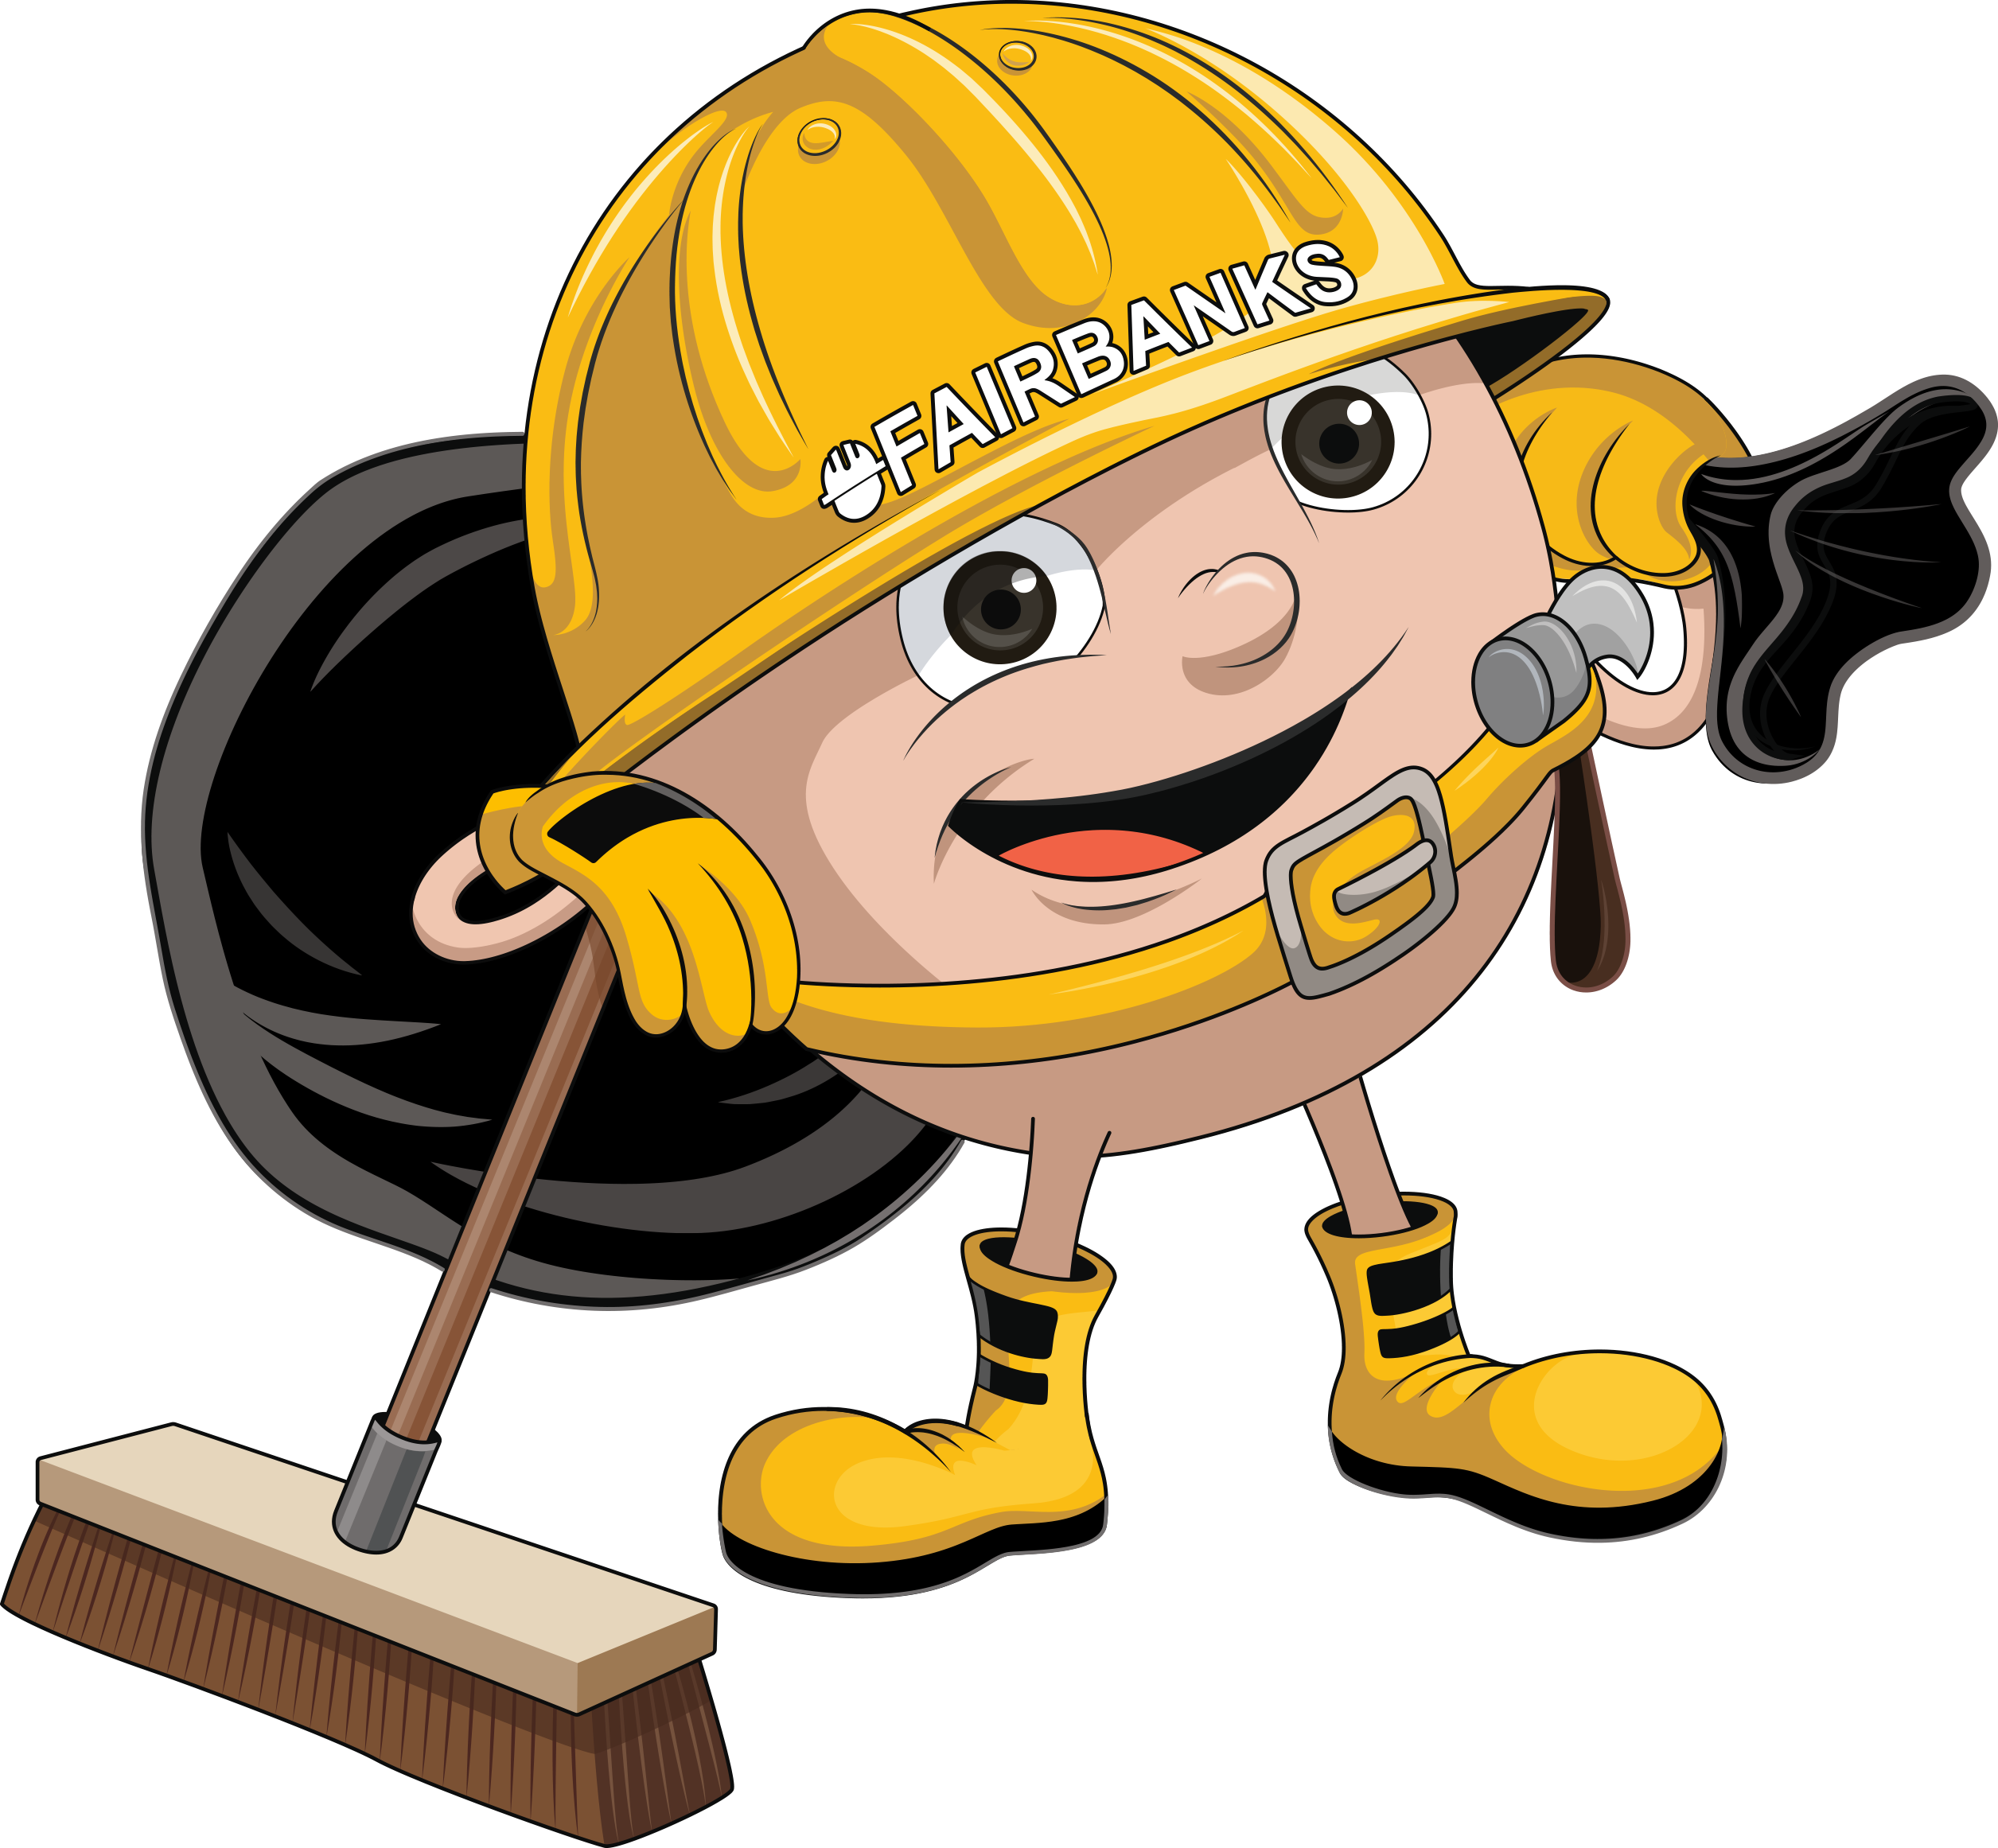 Construction Clean Up Contractor Insurance Mascot